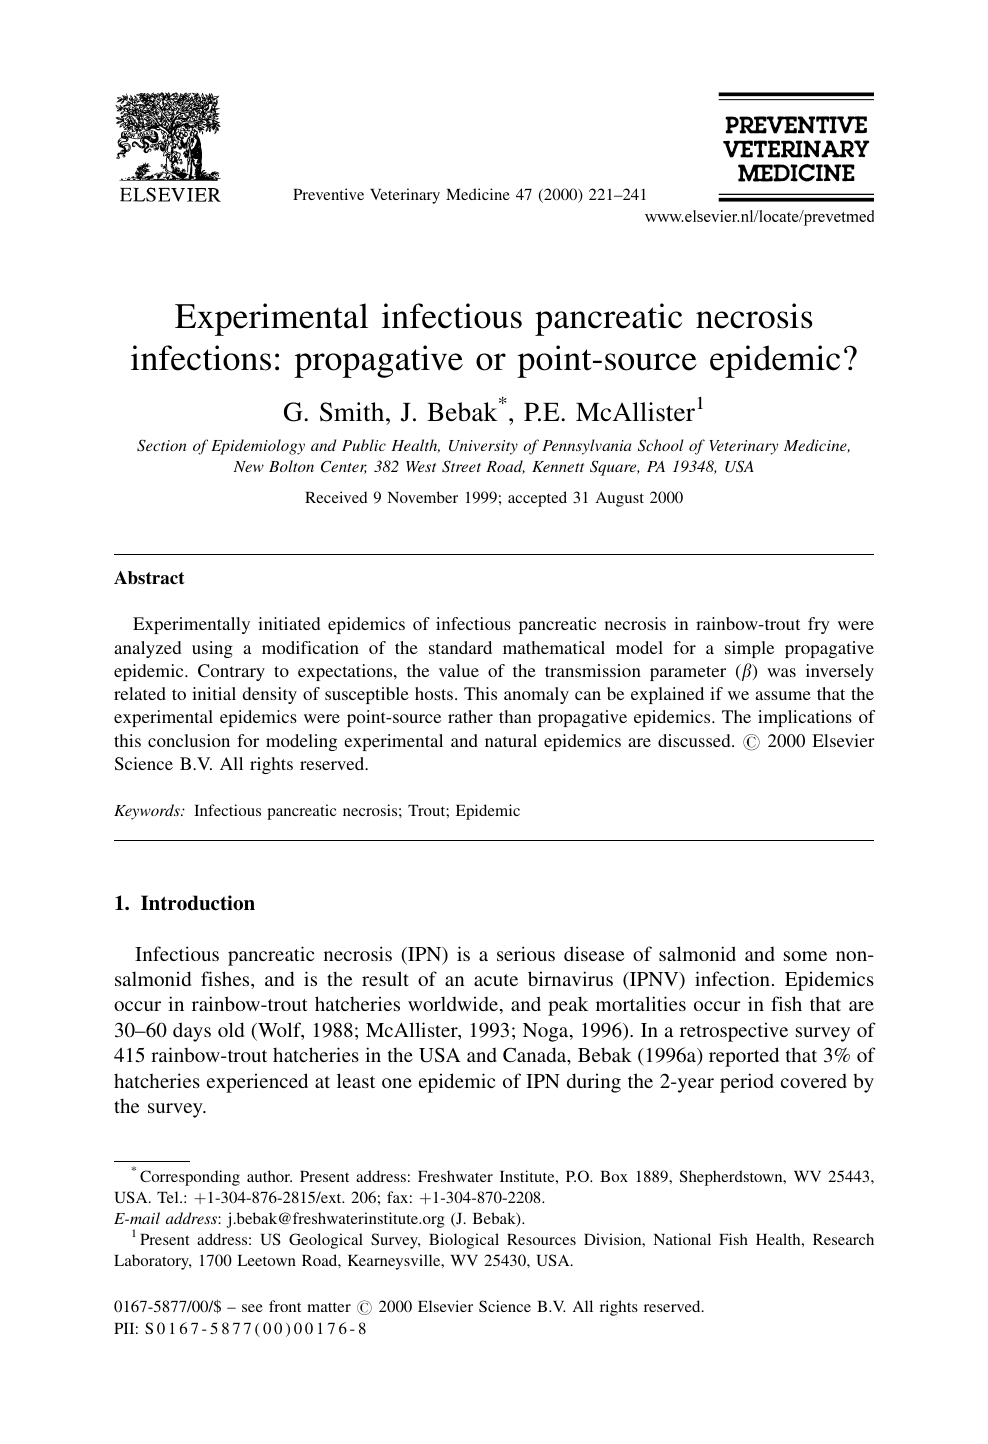 Experimental Infectious Pancreatic Necrosis Infections Propagative Or Point Source Epidemic Topic Of Research Paper In Veterinary Science Download Scholarly Article Pdf And Read For Free On Cyberleninka Open Science Hub